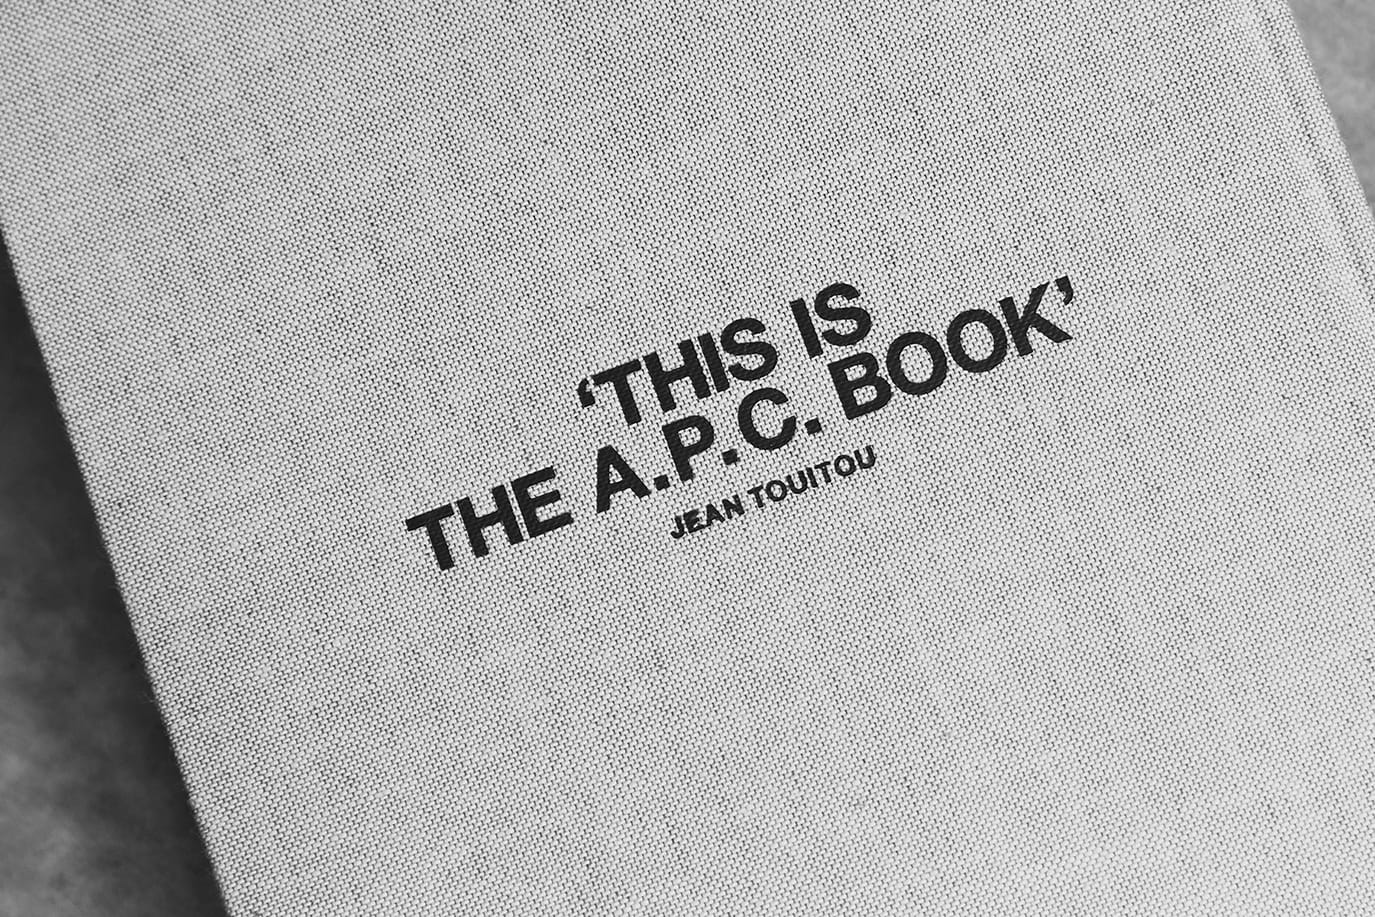 Inside Look at A.P.C. Transmission Phaidon Book | Hypebeast